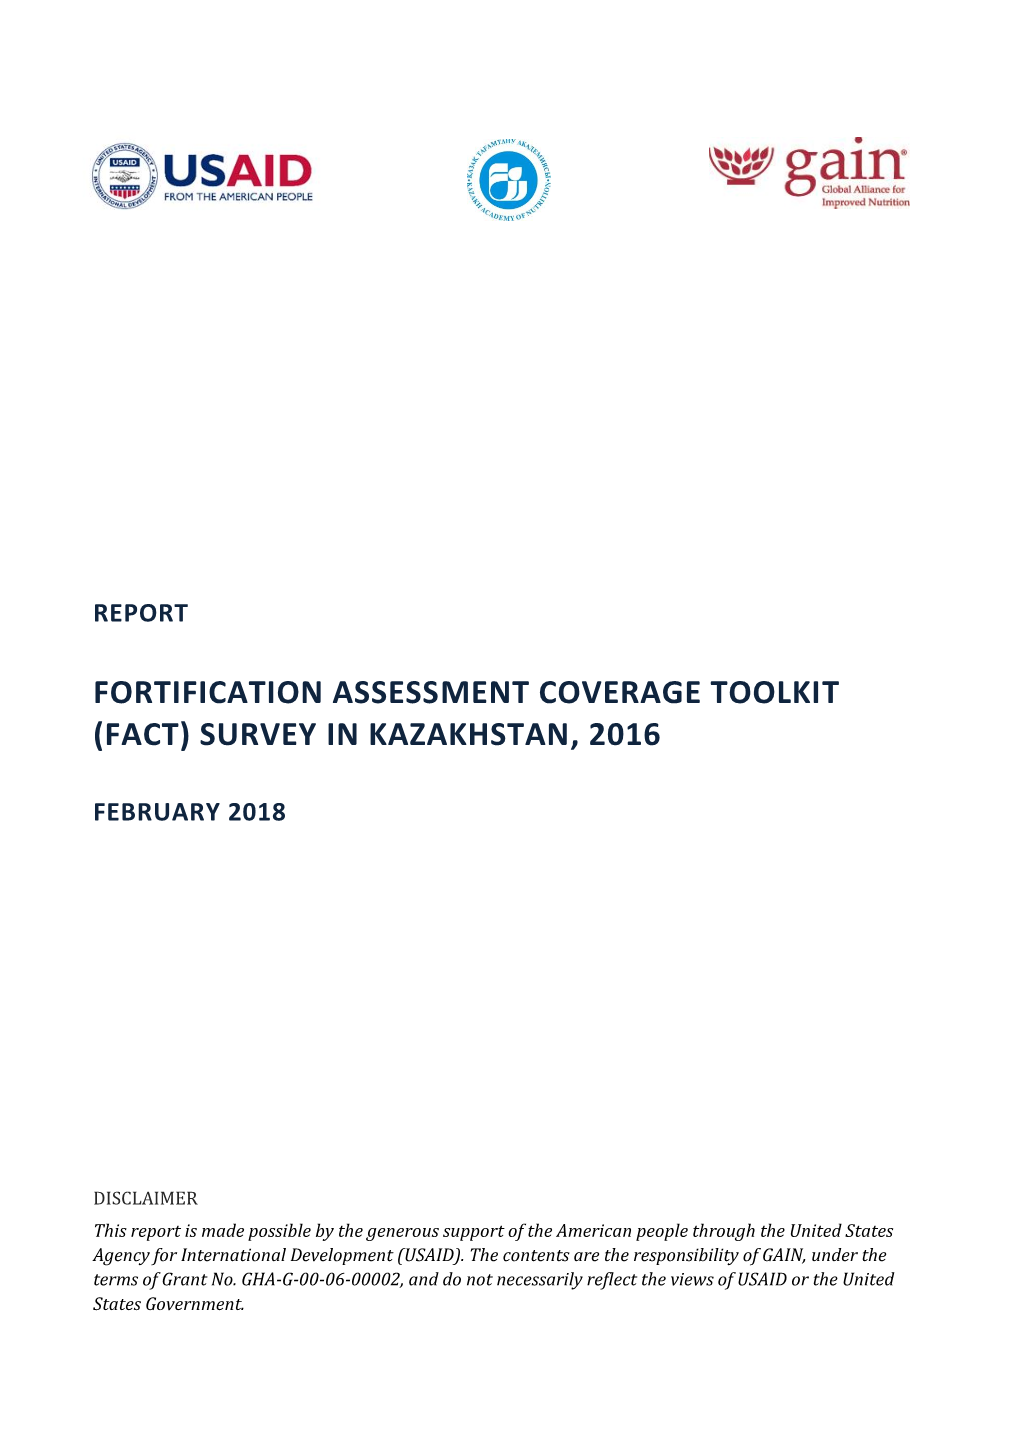 Fortification Assessment Coverage Toolkit (Fact) Survey in Kazakhstan, 2016